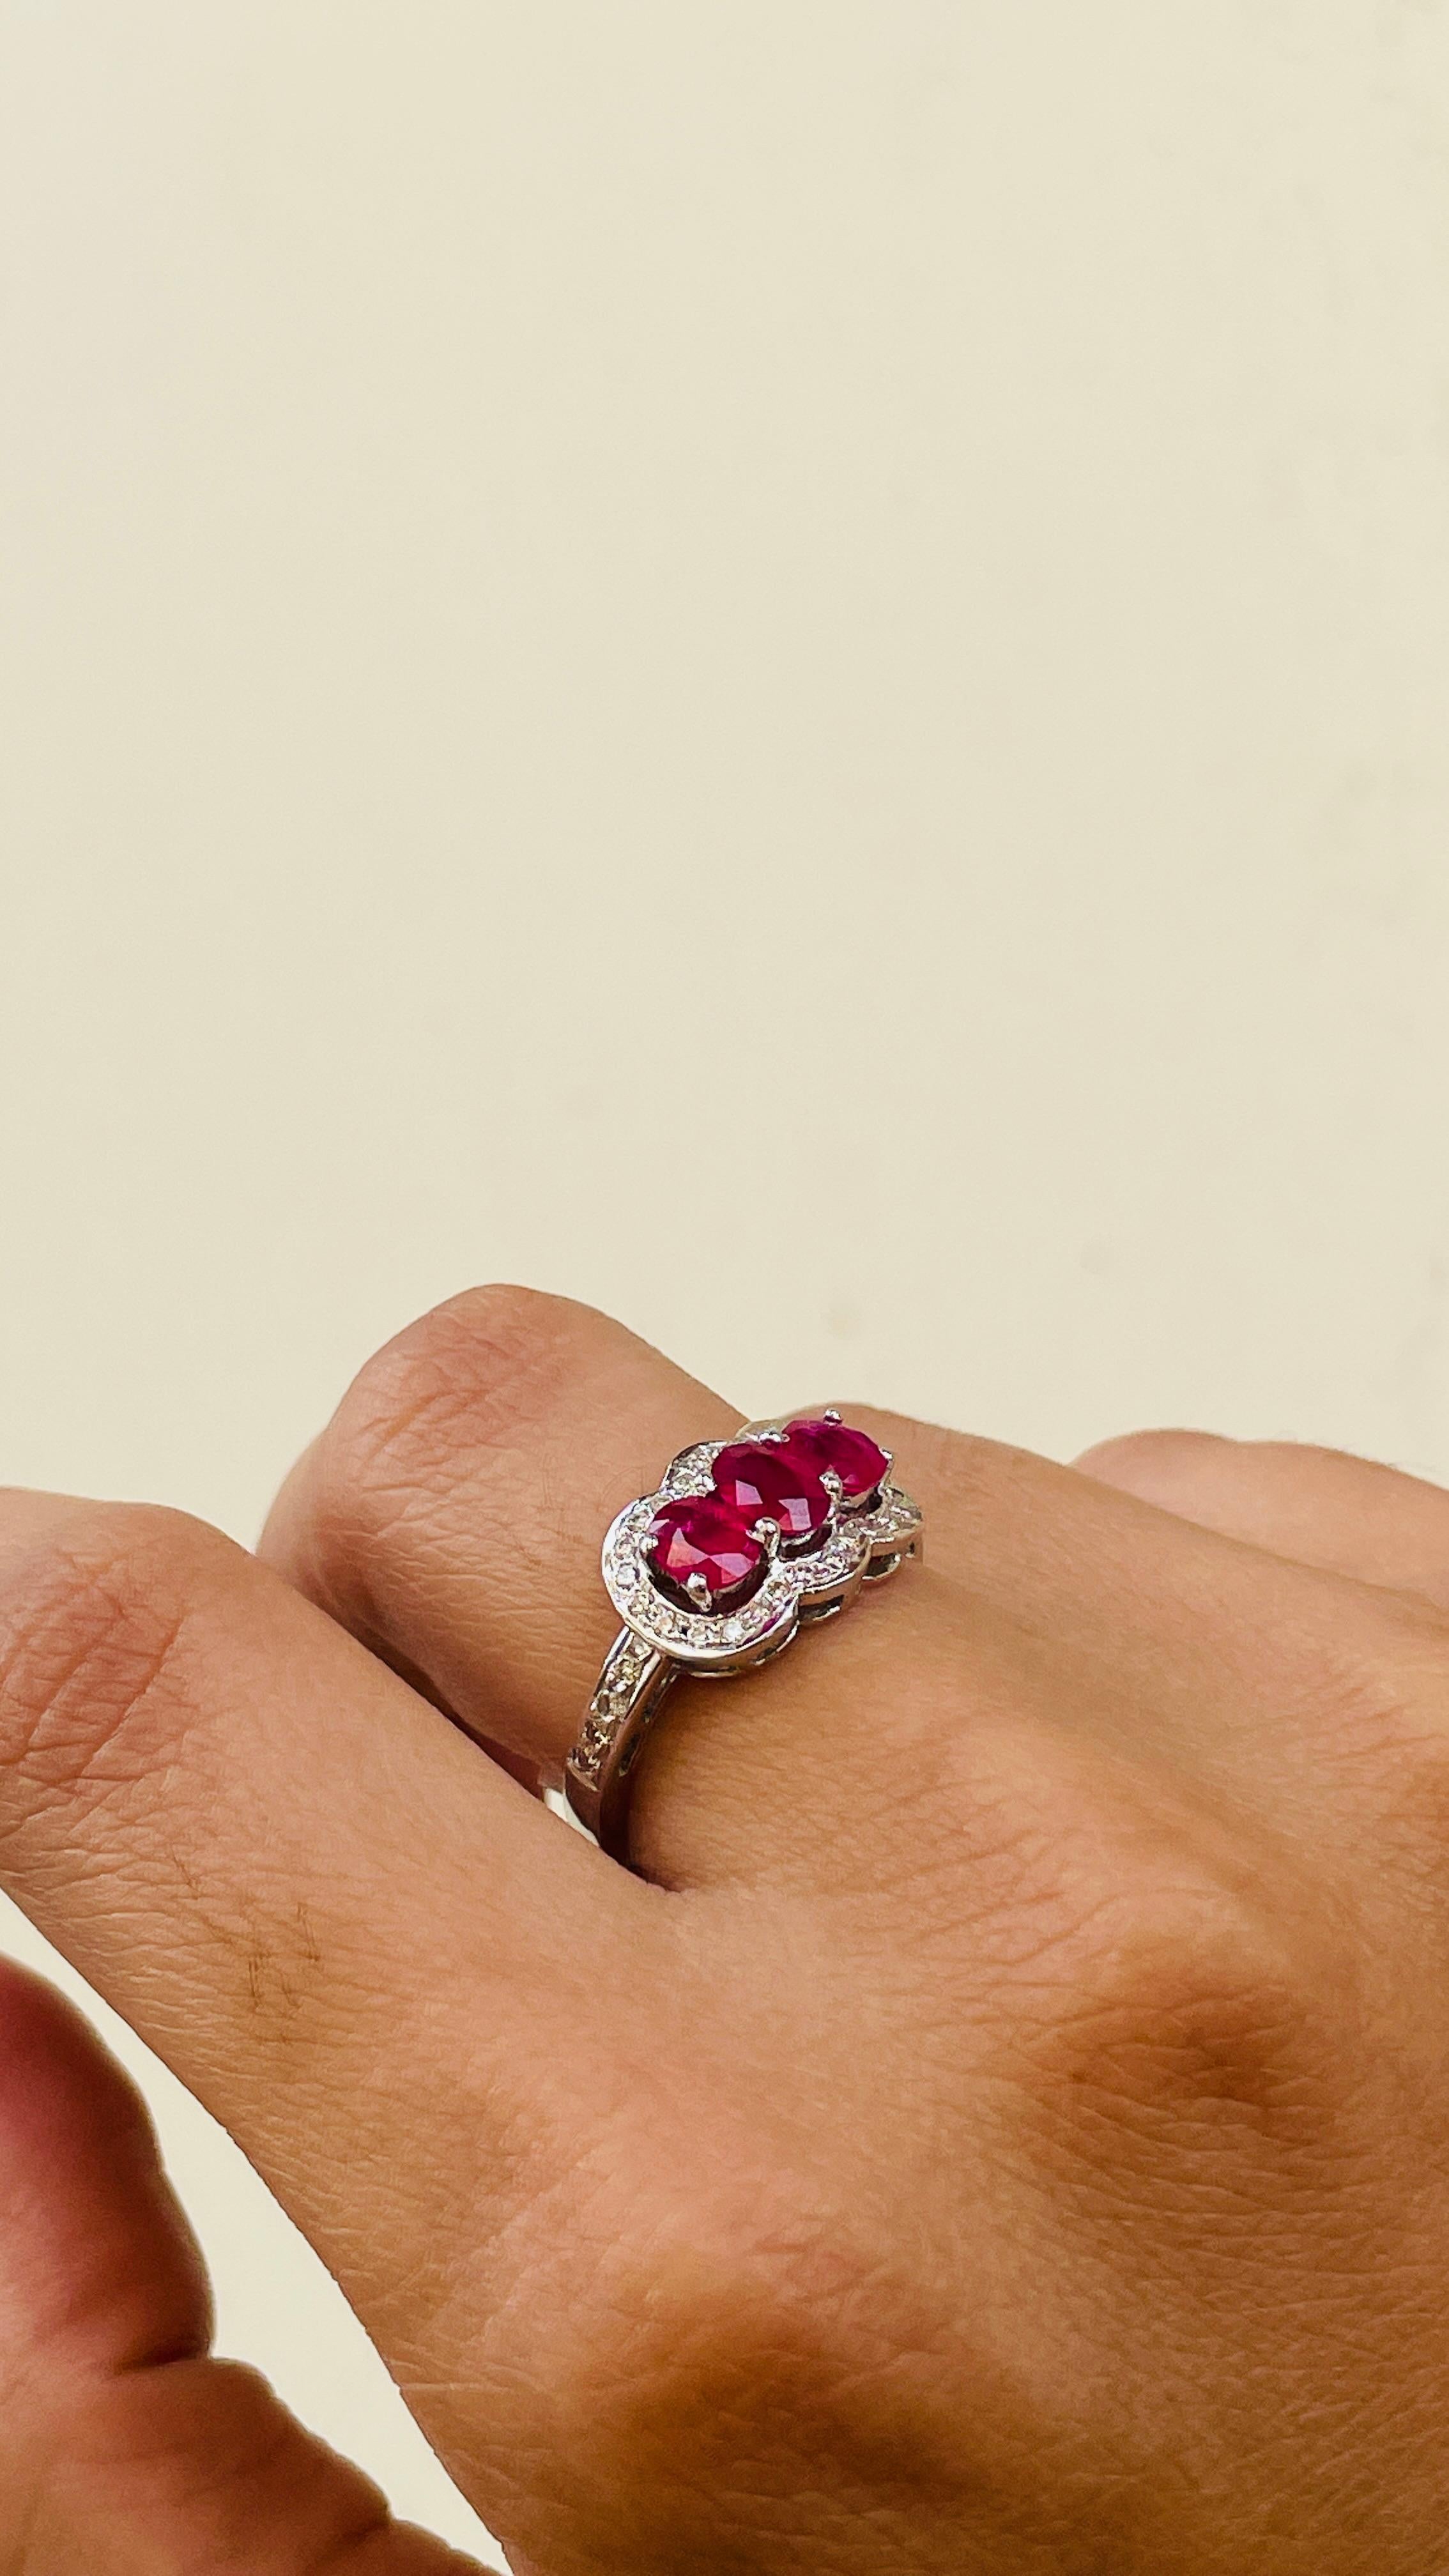 For Sale:  Oval Cut Three Stone Ruby Engagement Ring in 18K White Gold with Diamonds 14